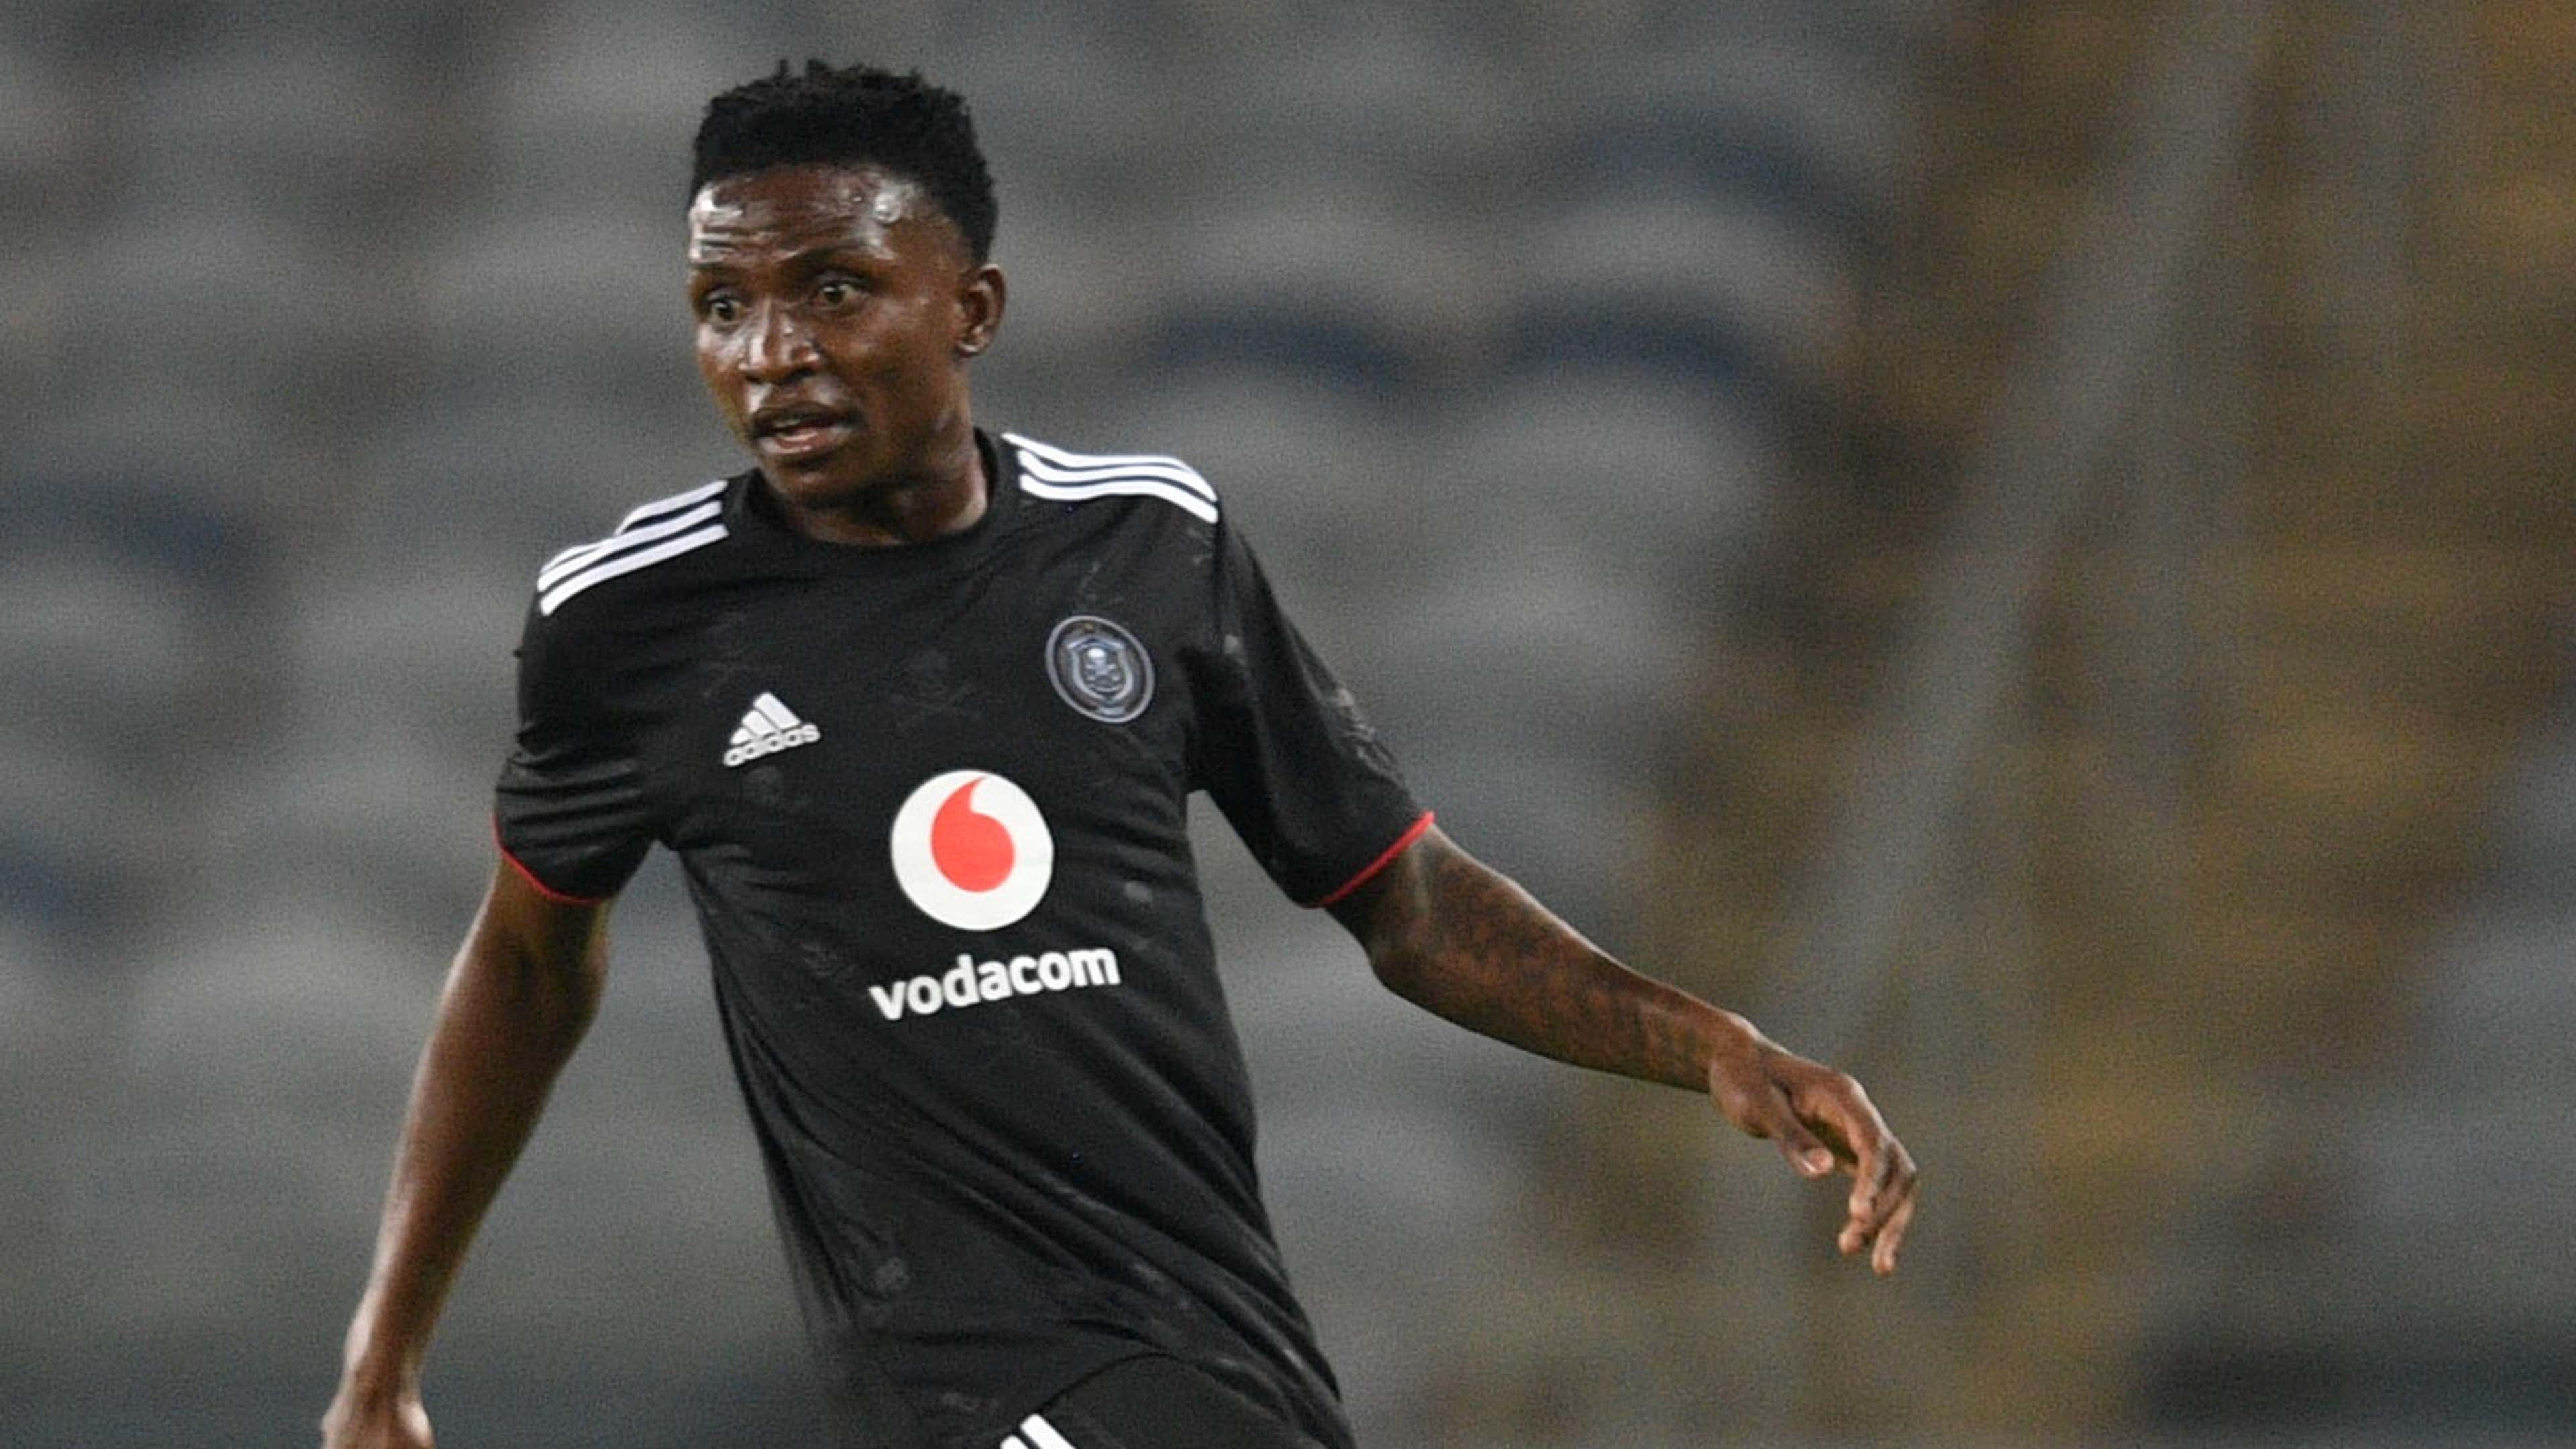 Royal AM break Orlando Pirates' Champions League hopes with late goal